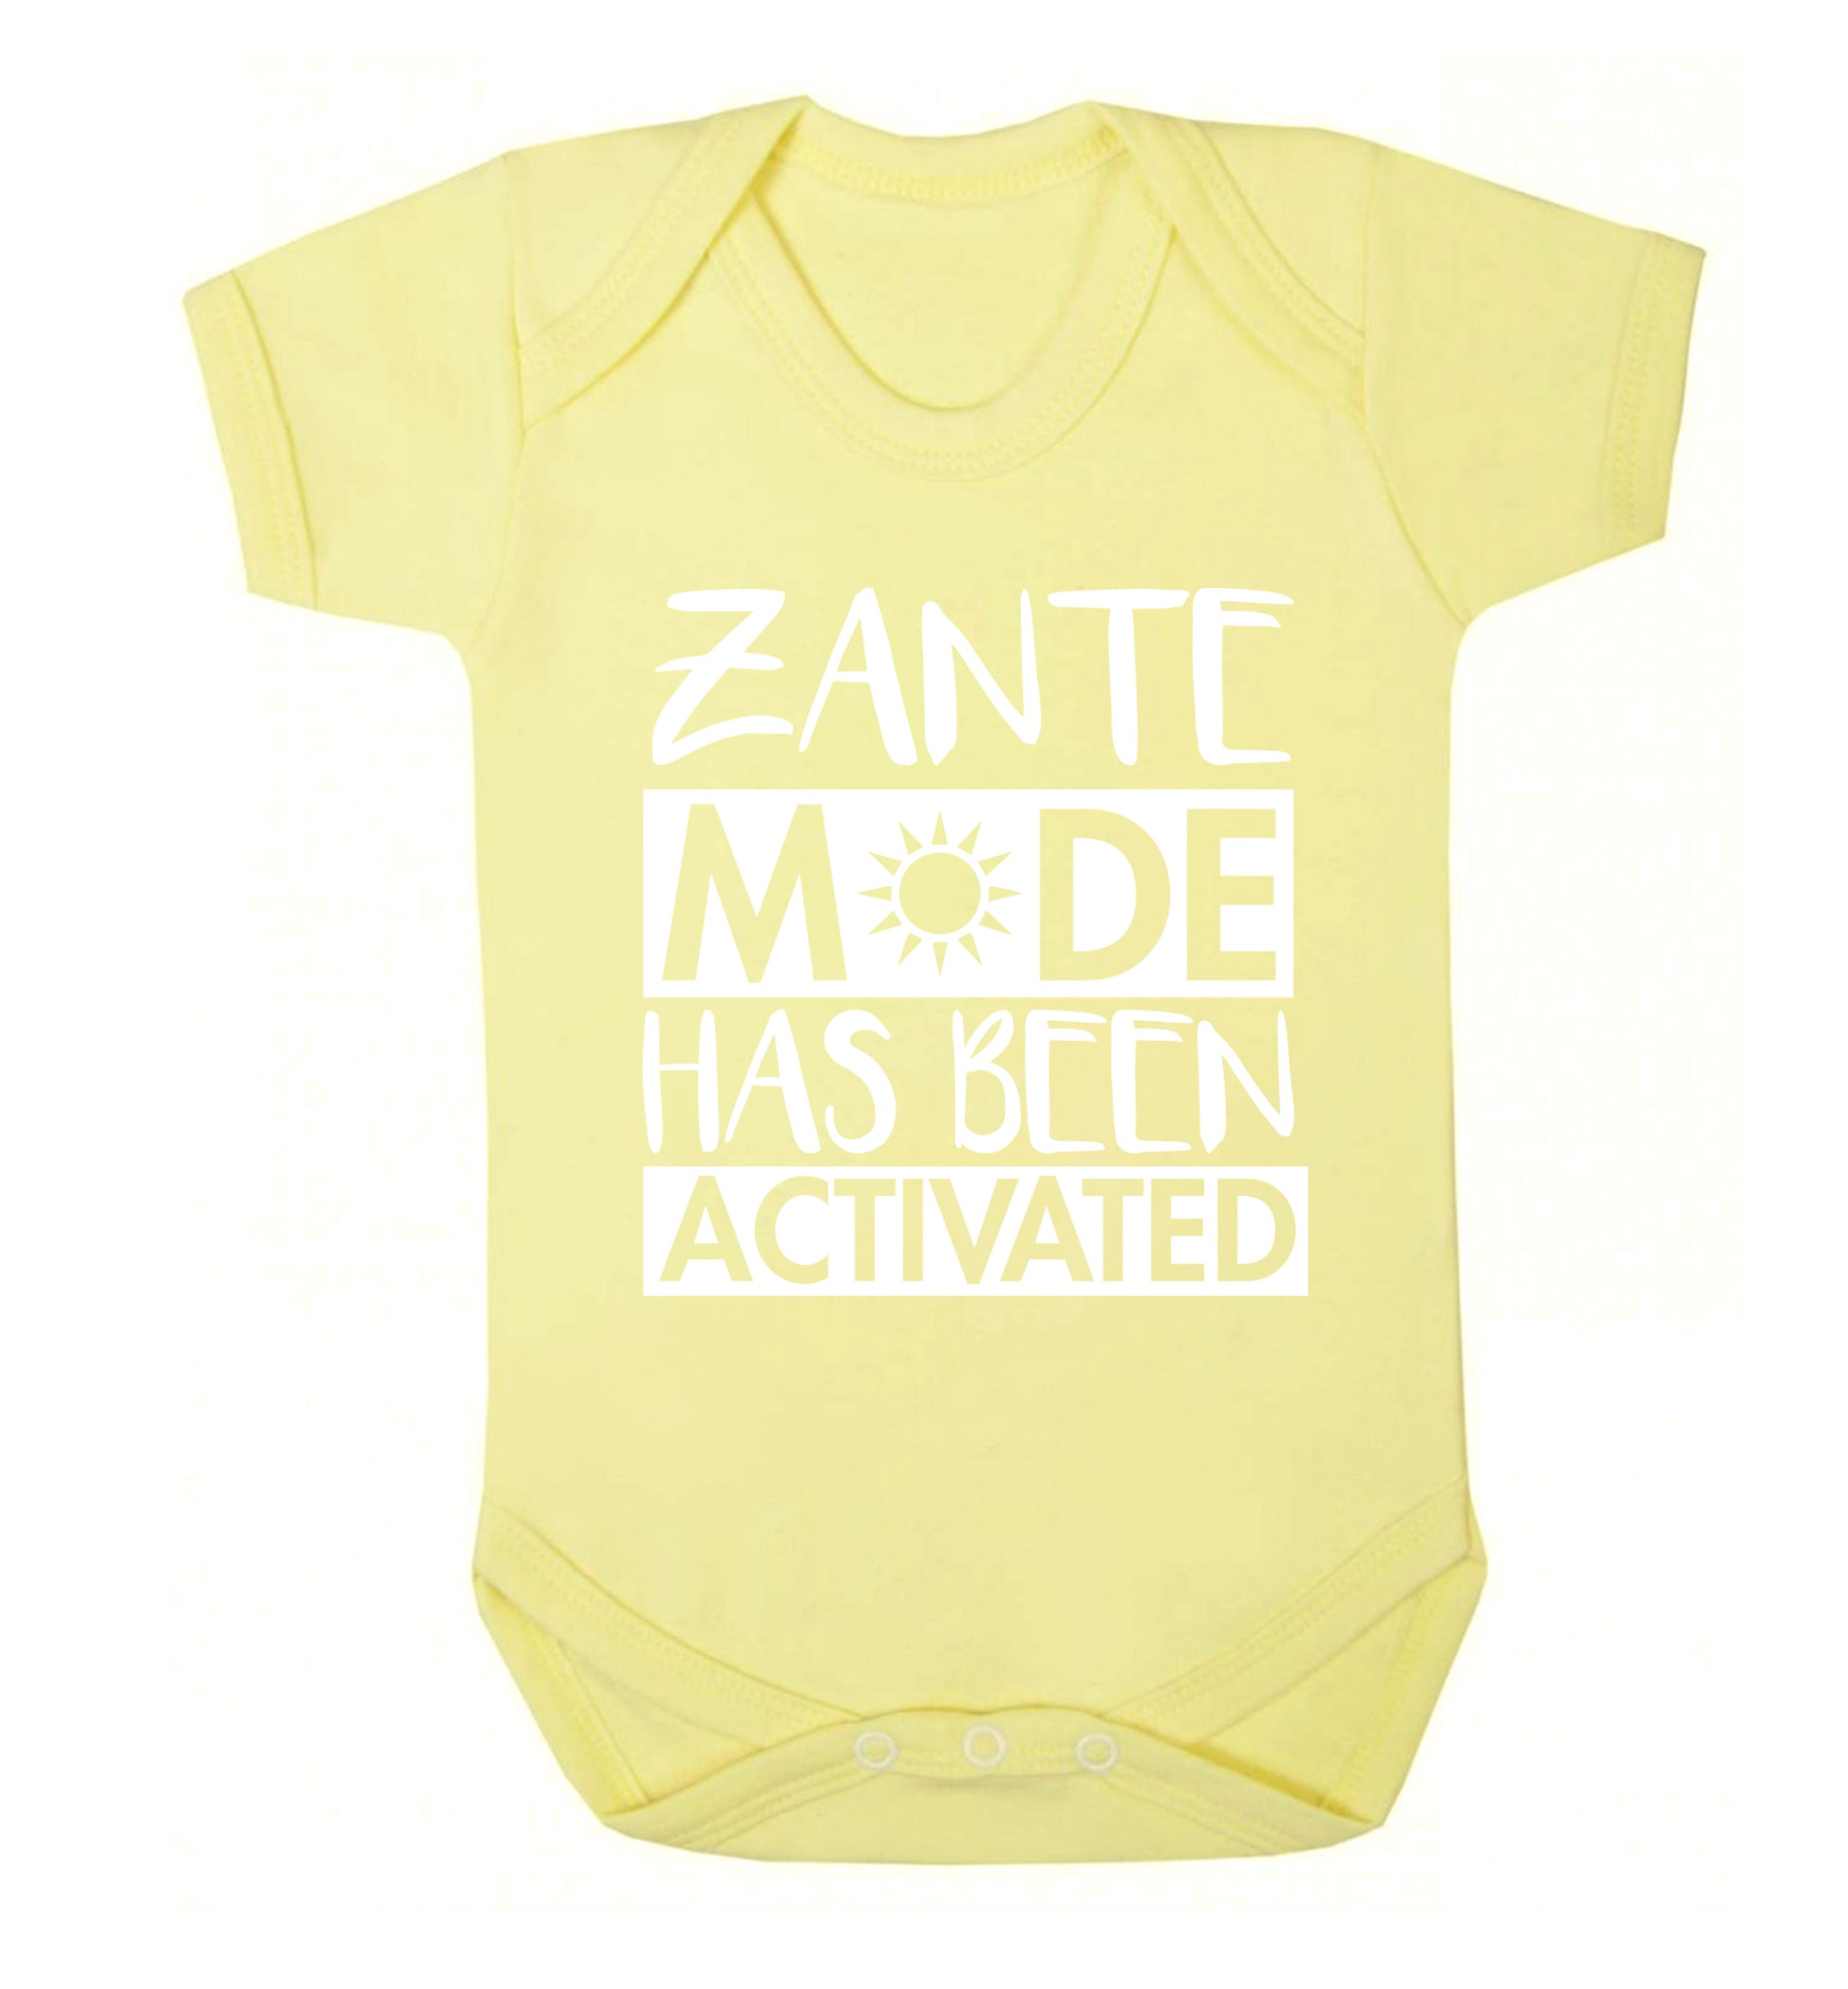 Zante mode has been activated Baby Vest pale yellow 18-24 months